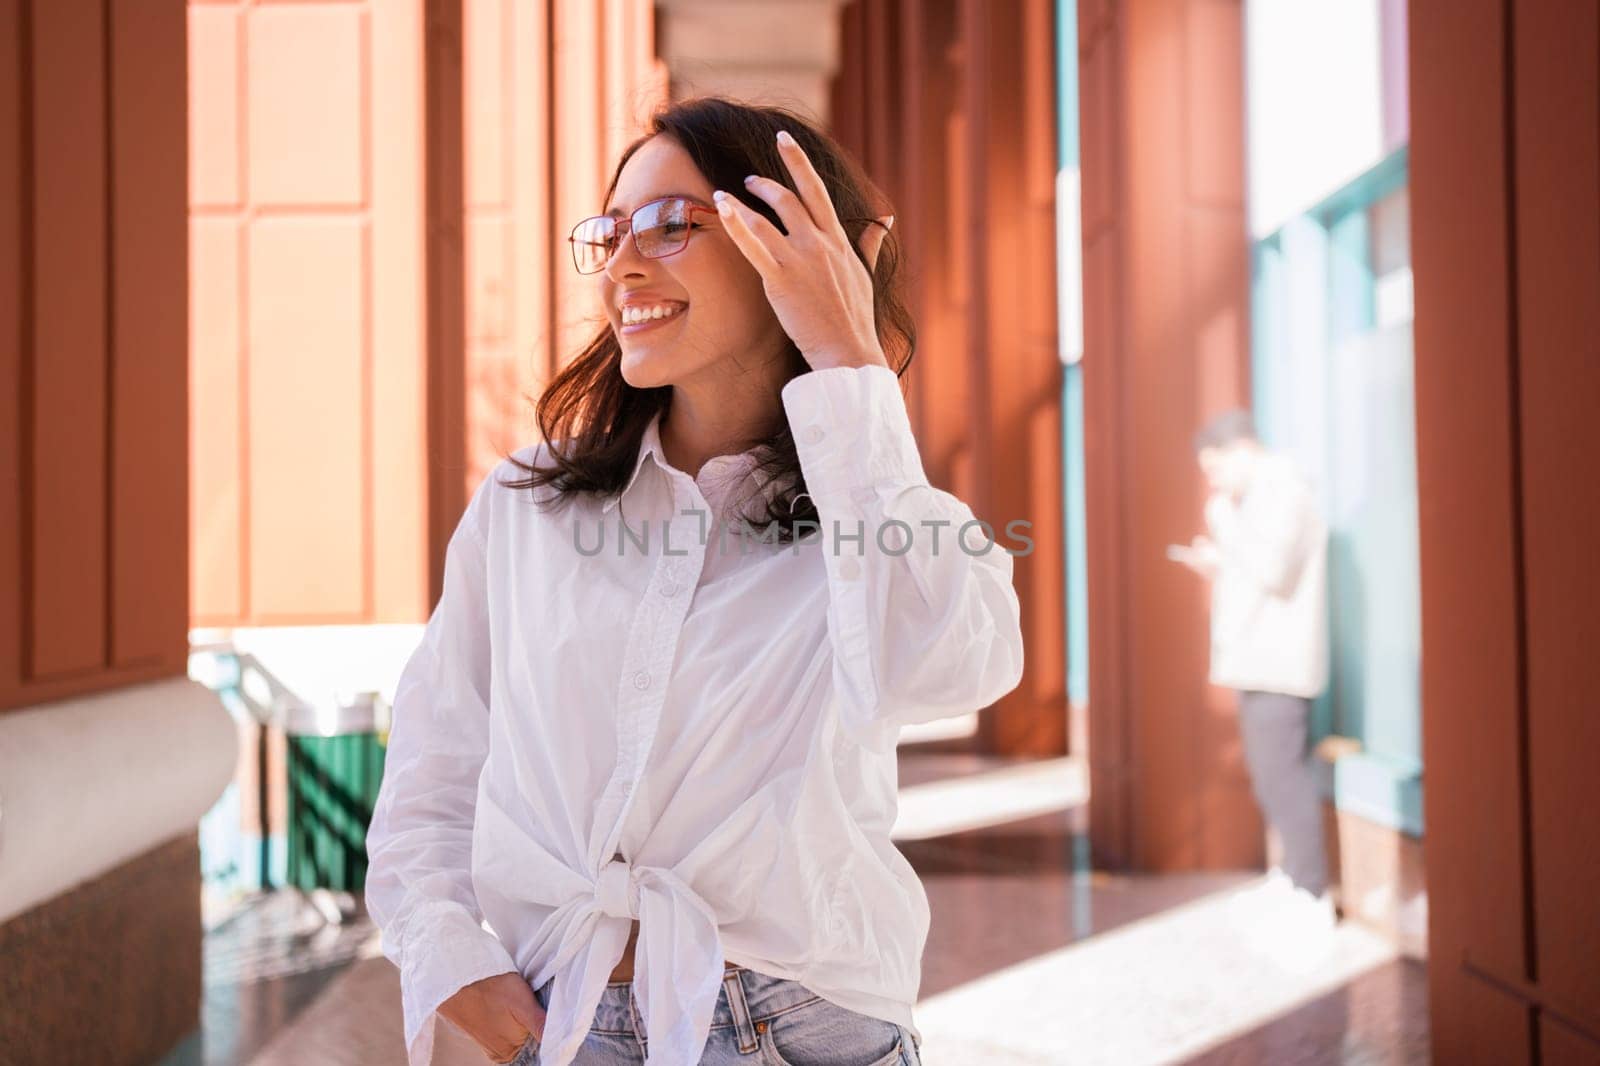 Successful smiling business woman wearing eyeglasses correct hairstyle by hand. Modern businesswoman smile standing outdoor dressed white shirt looking away. Business woman happy positive emotions